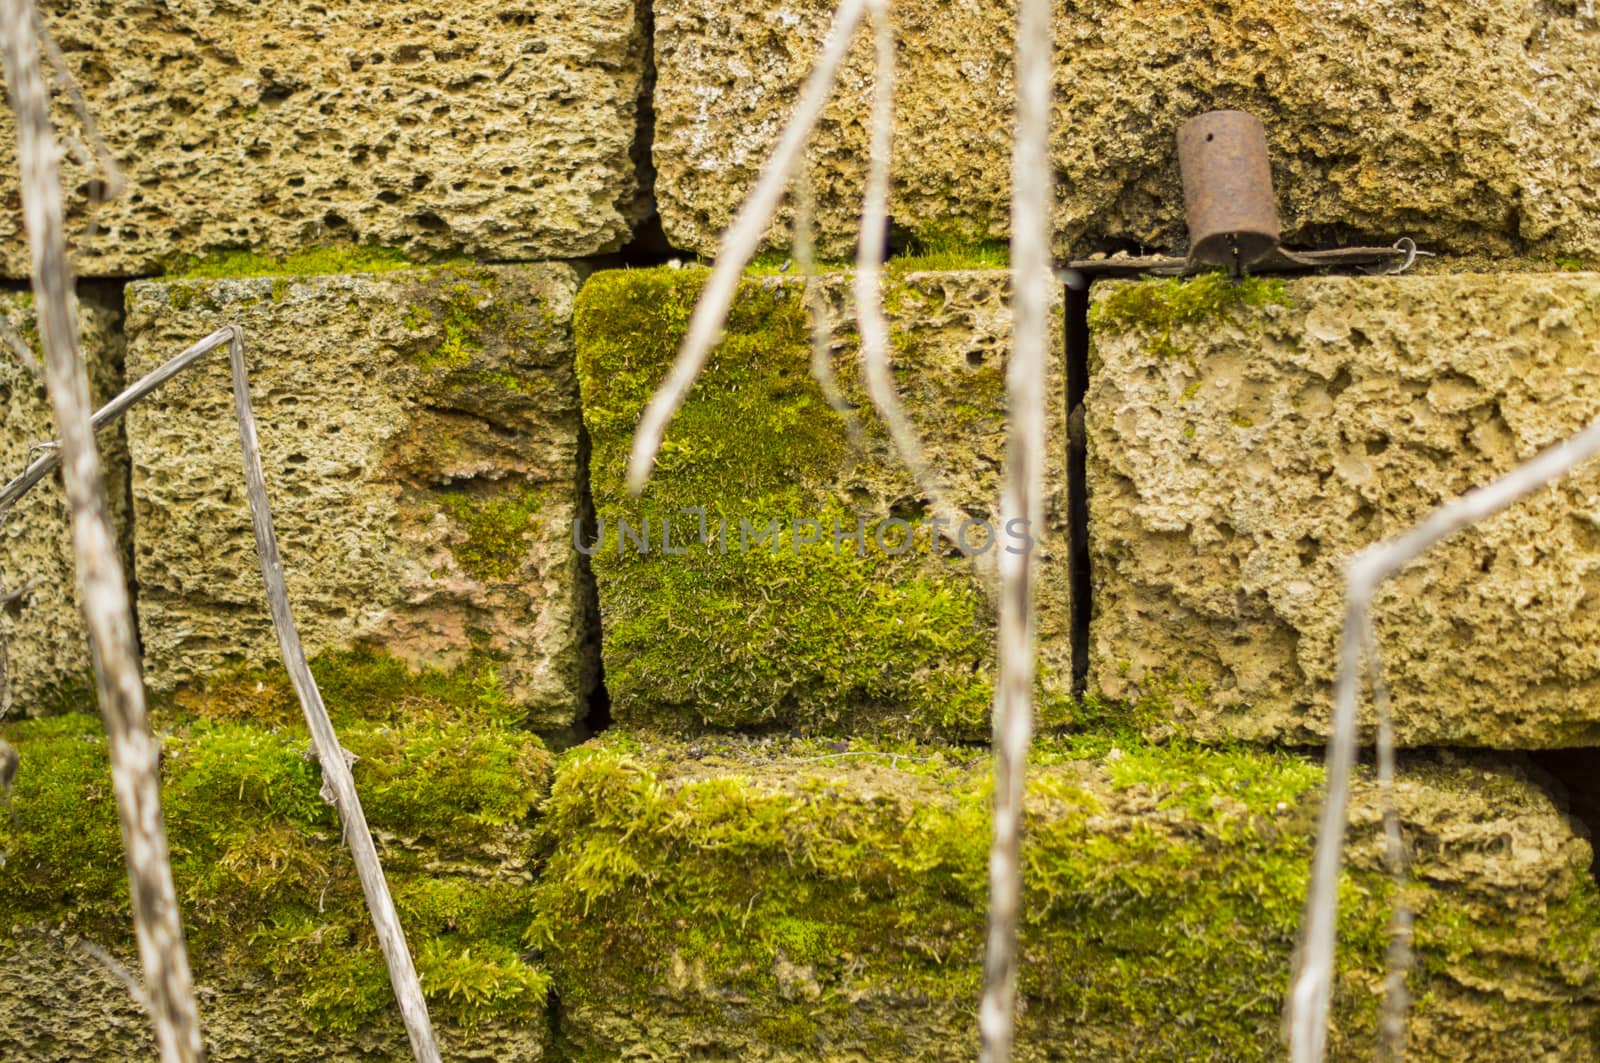 Moss on a Stone Wall. For your commercial and editorial use